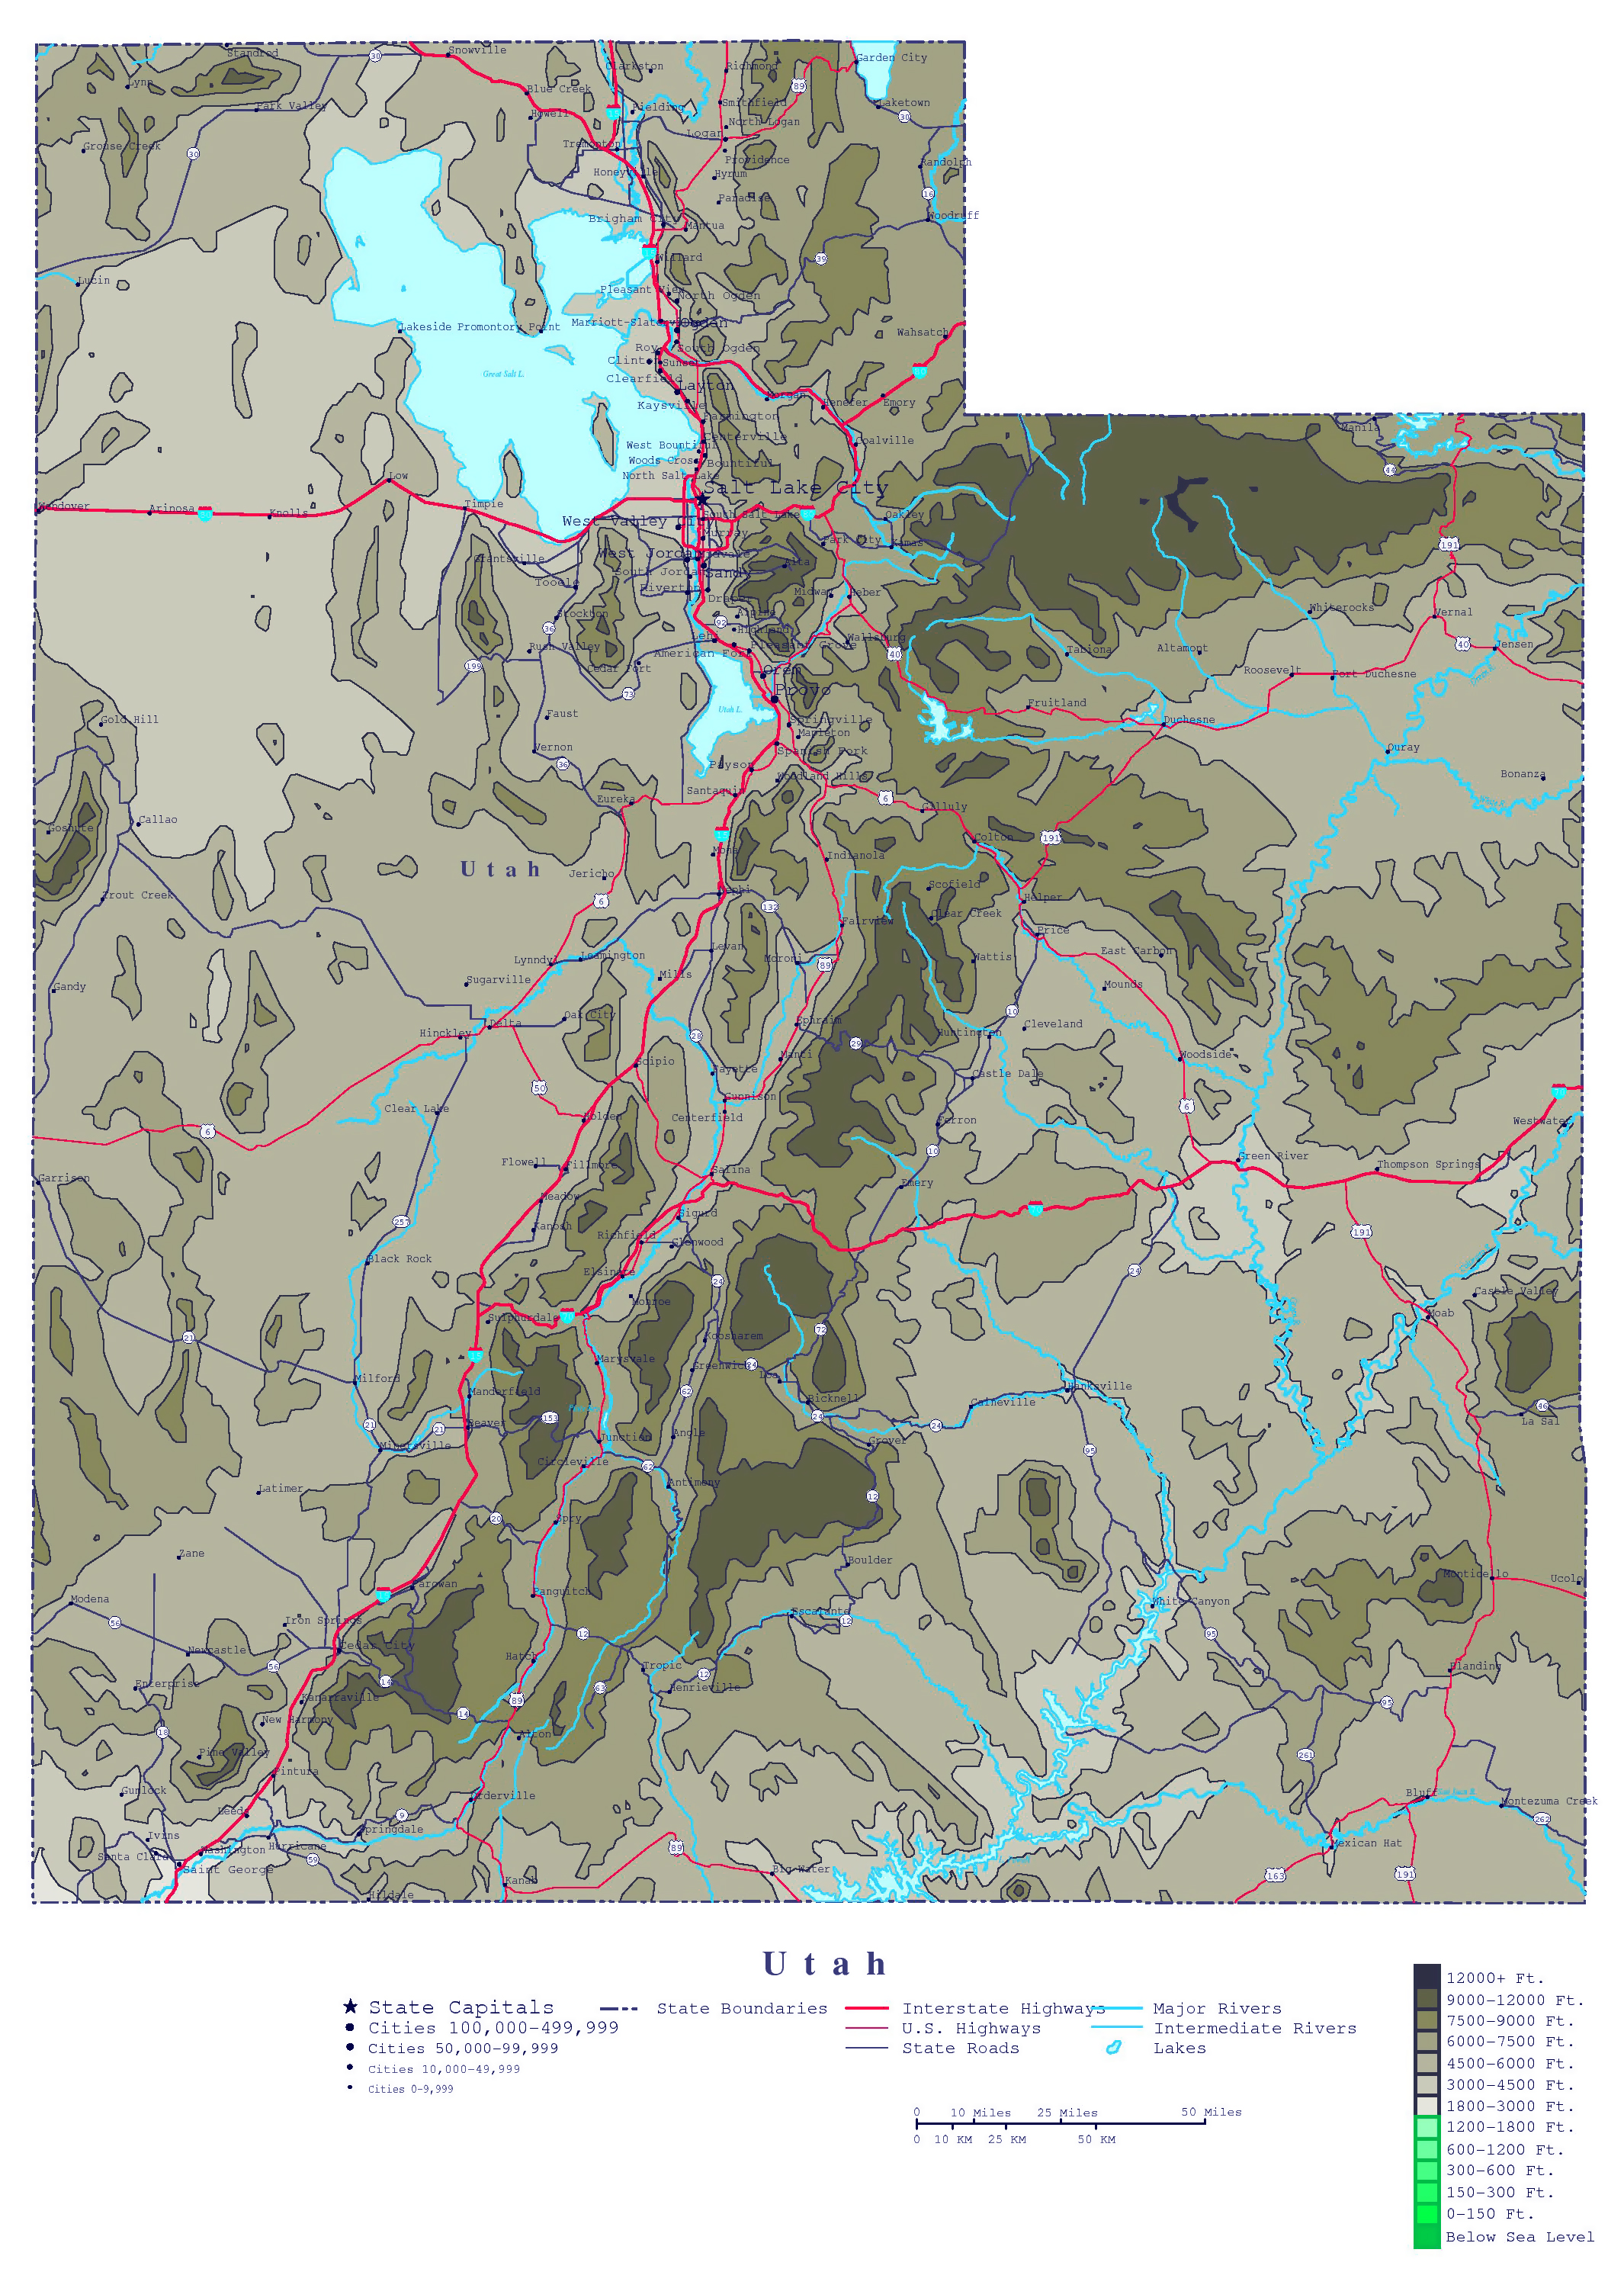 Large Detailed Elevation Map Of Utah State With Roads Highways